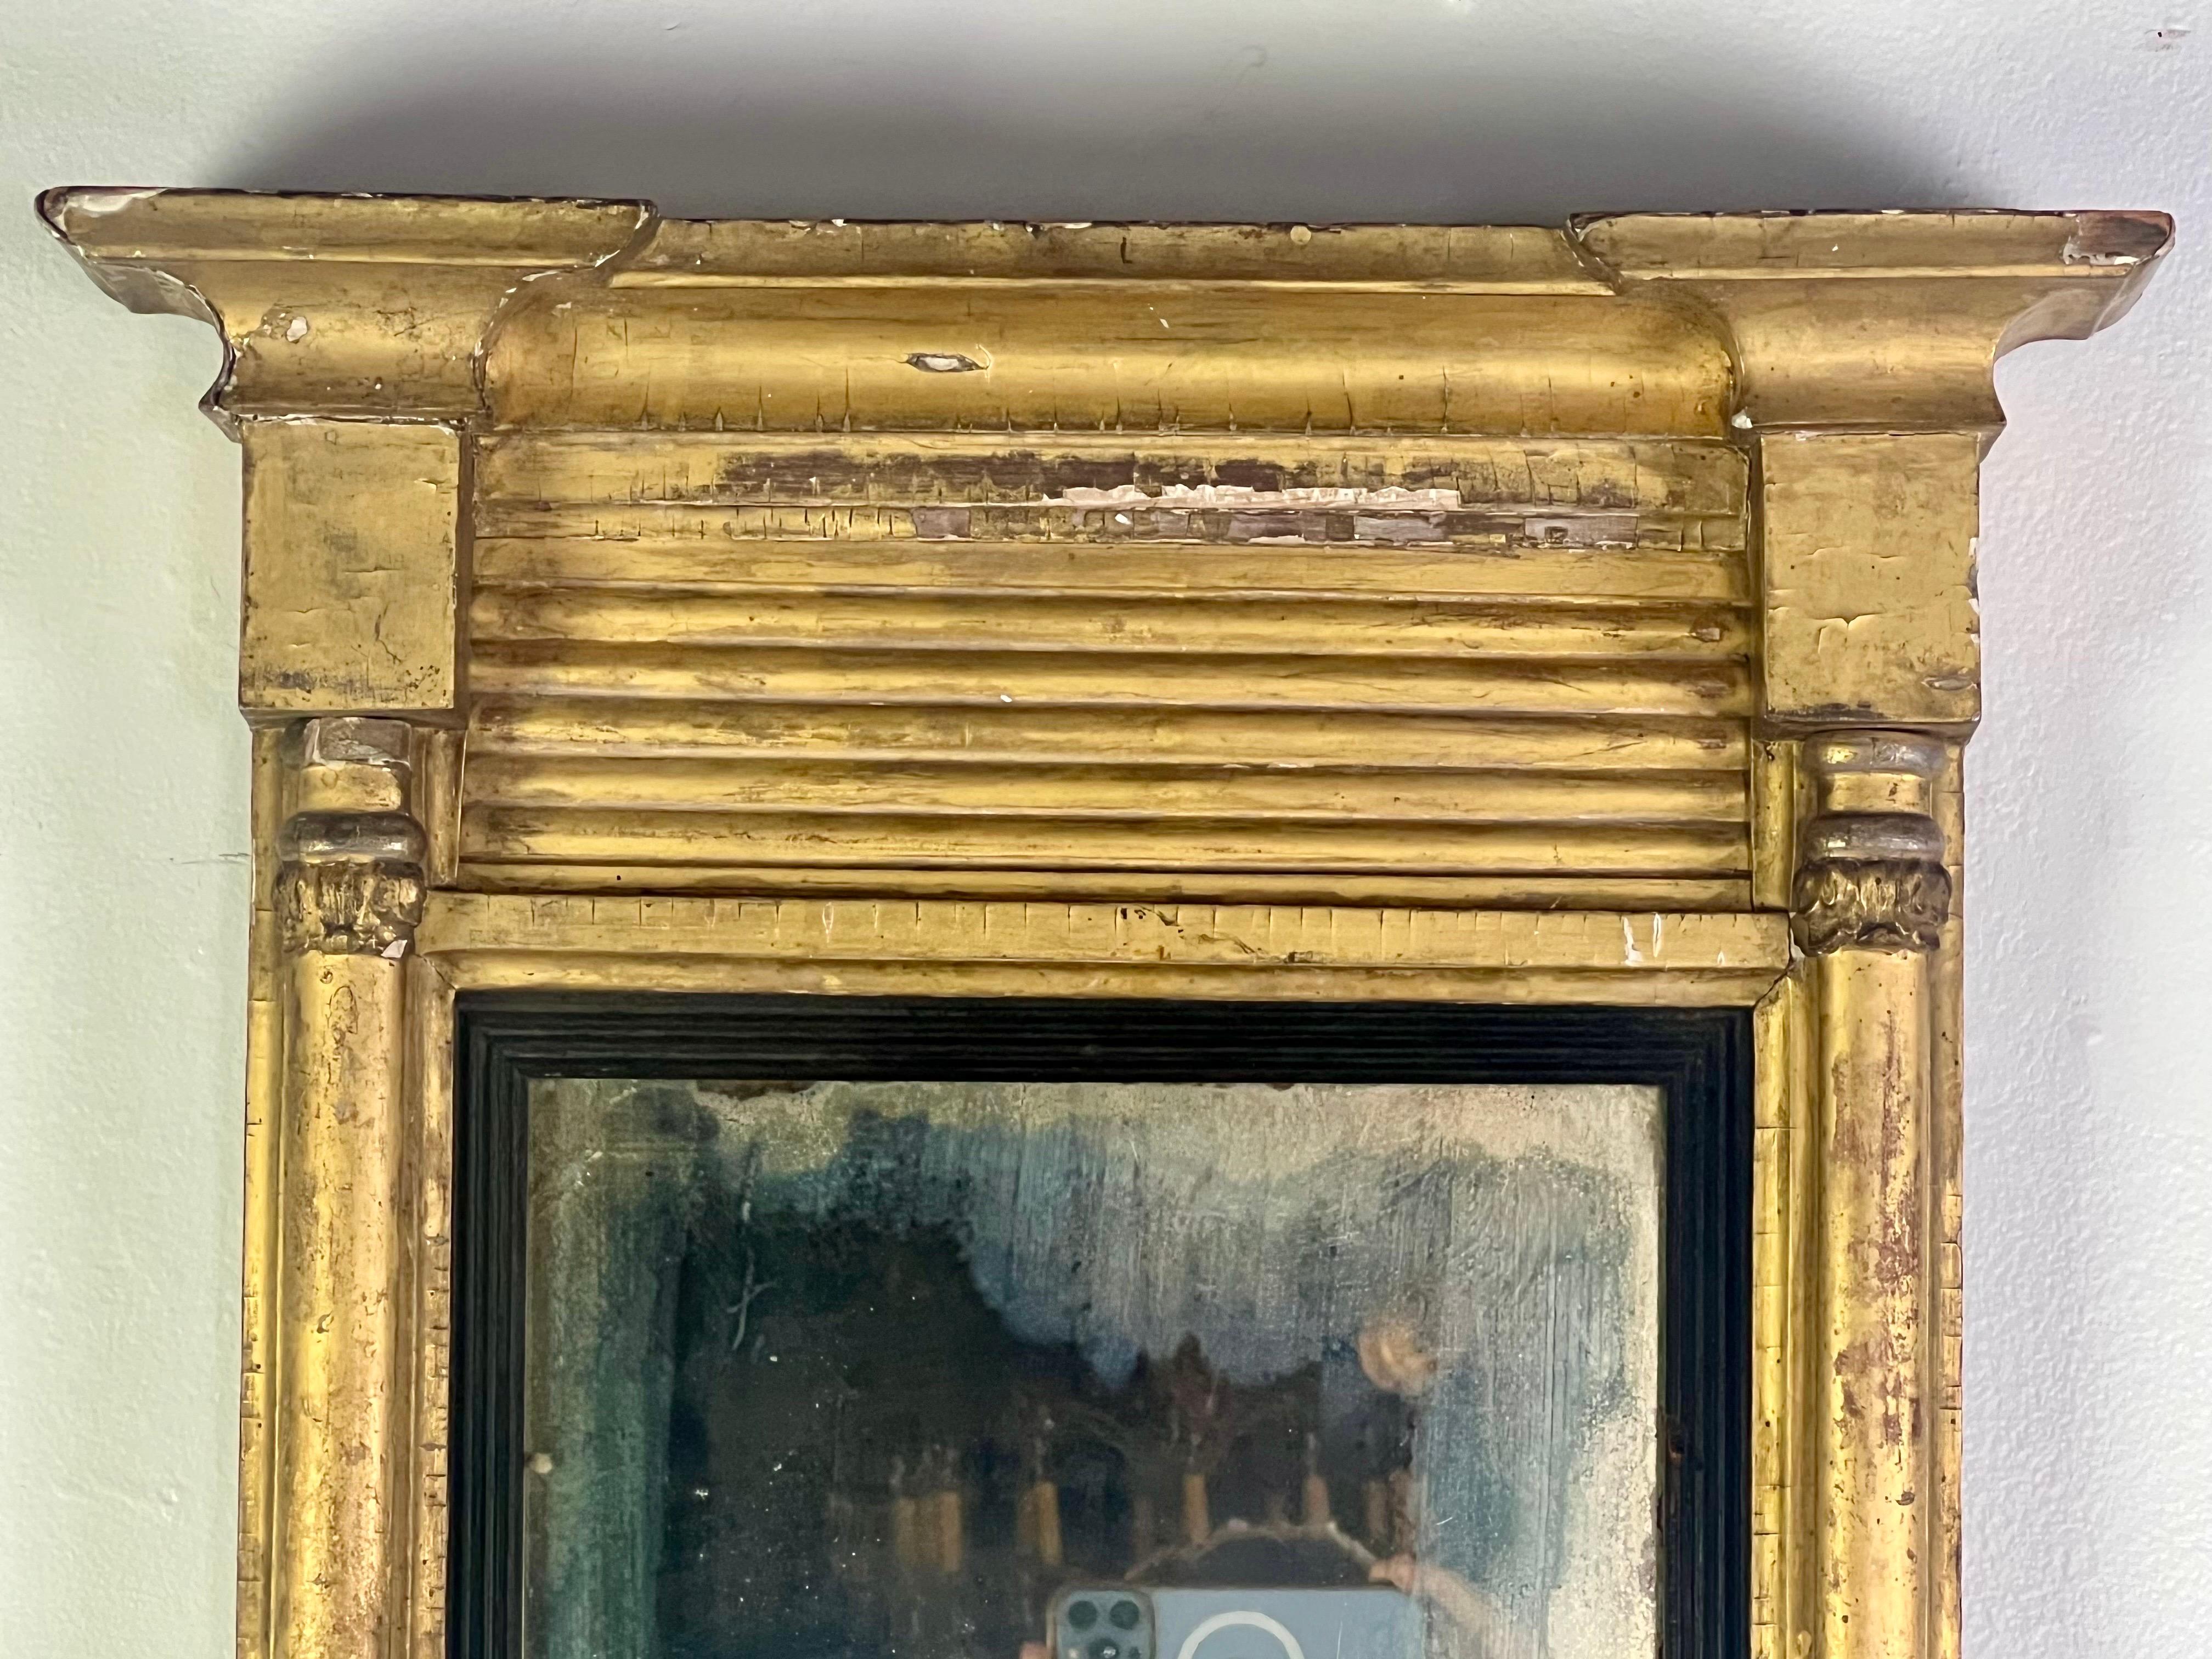 A 19-century American Empire Style gilt-wood mirror, designed in a rectangular shape with an antiqued mirror insert, is a classic and elegant piece that would bring a touch of timeless beauty to any space.